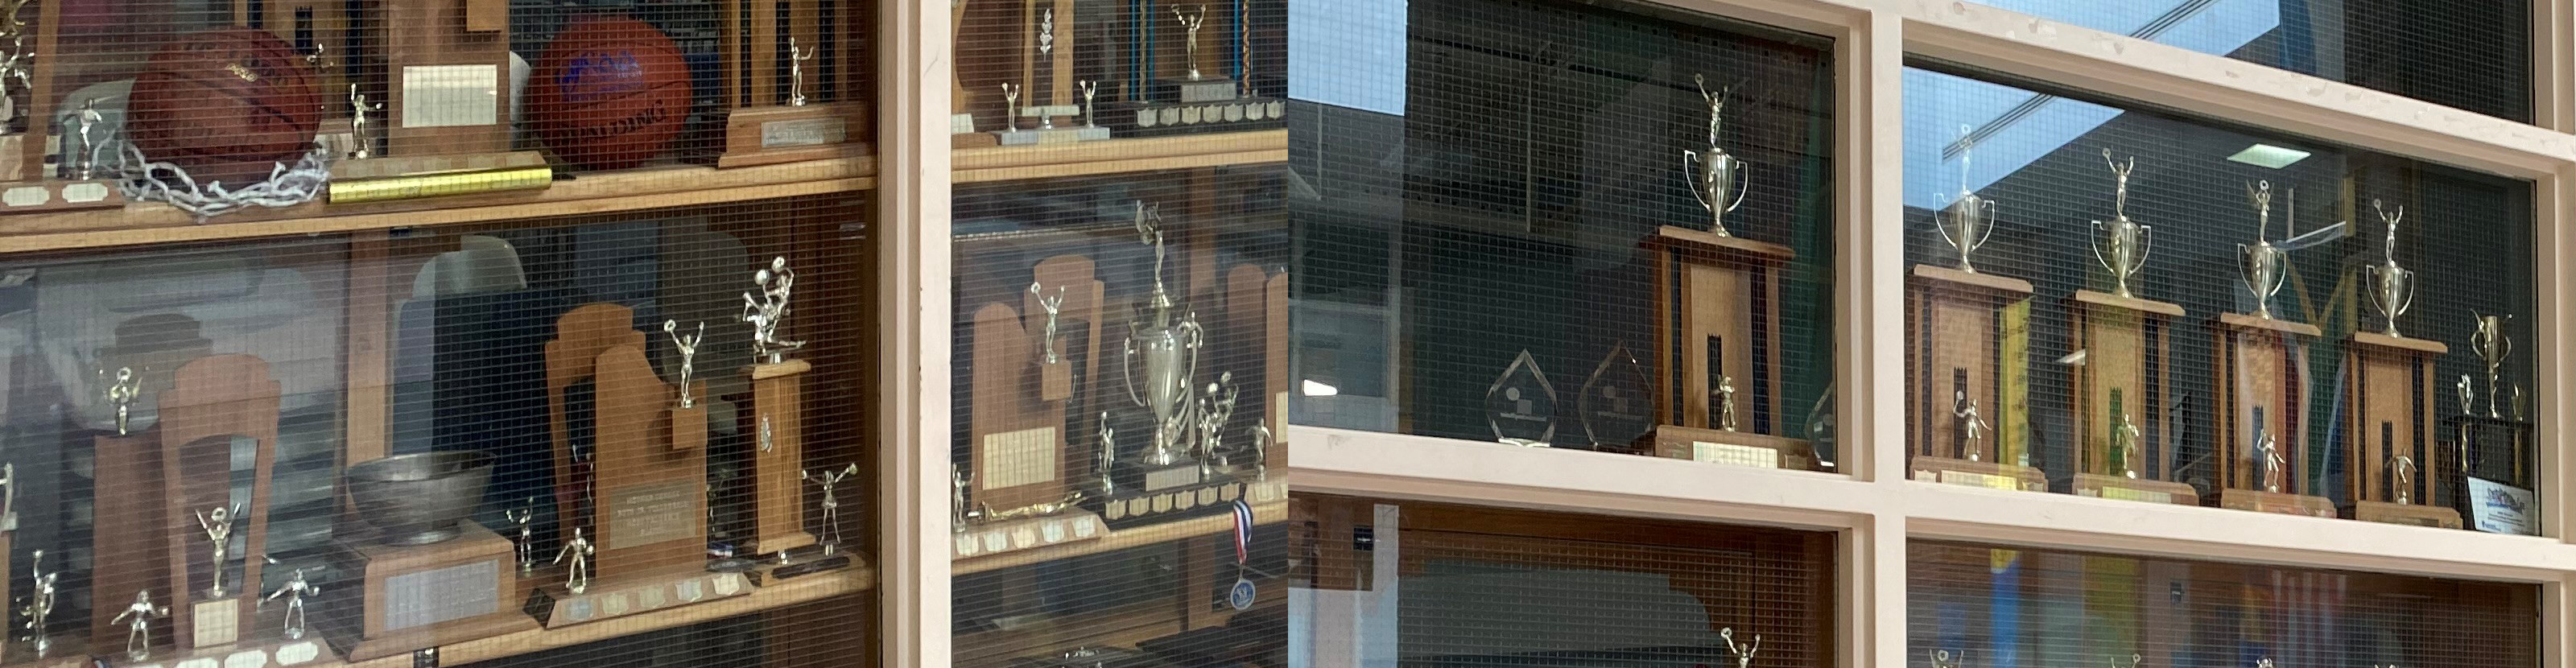 Two side by side photos of a school trophy case with medals, awards and trophies arranged on the shelves.